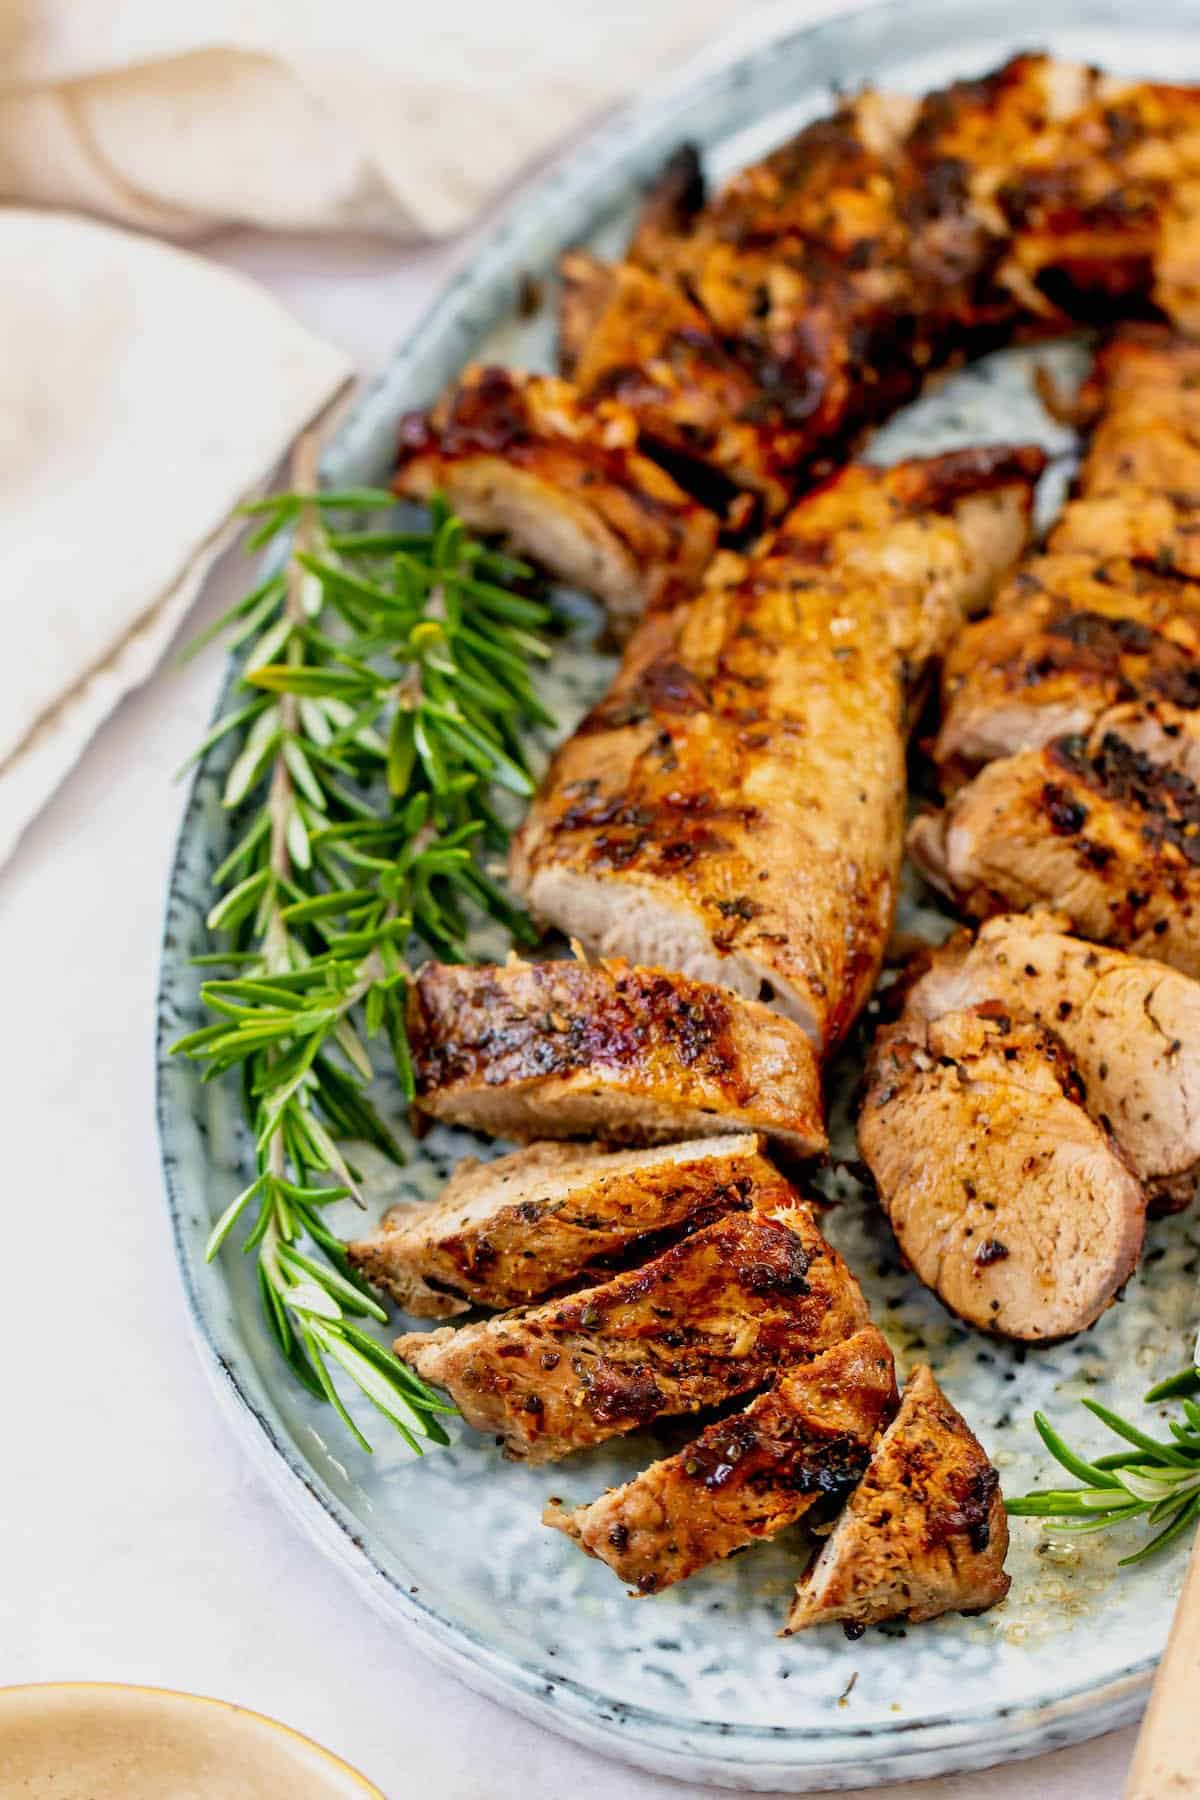 Close-up of grilled pork tenderloin on a serving platter, garnished with fresh rosemary. Some of the pork is sliced into medallions.